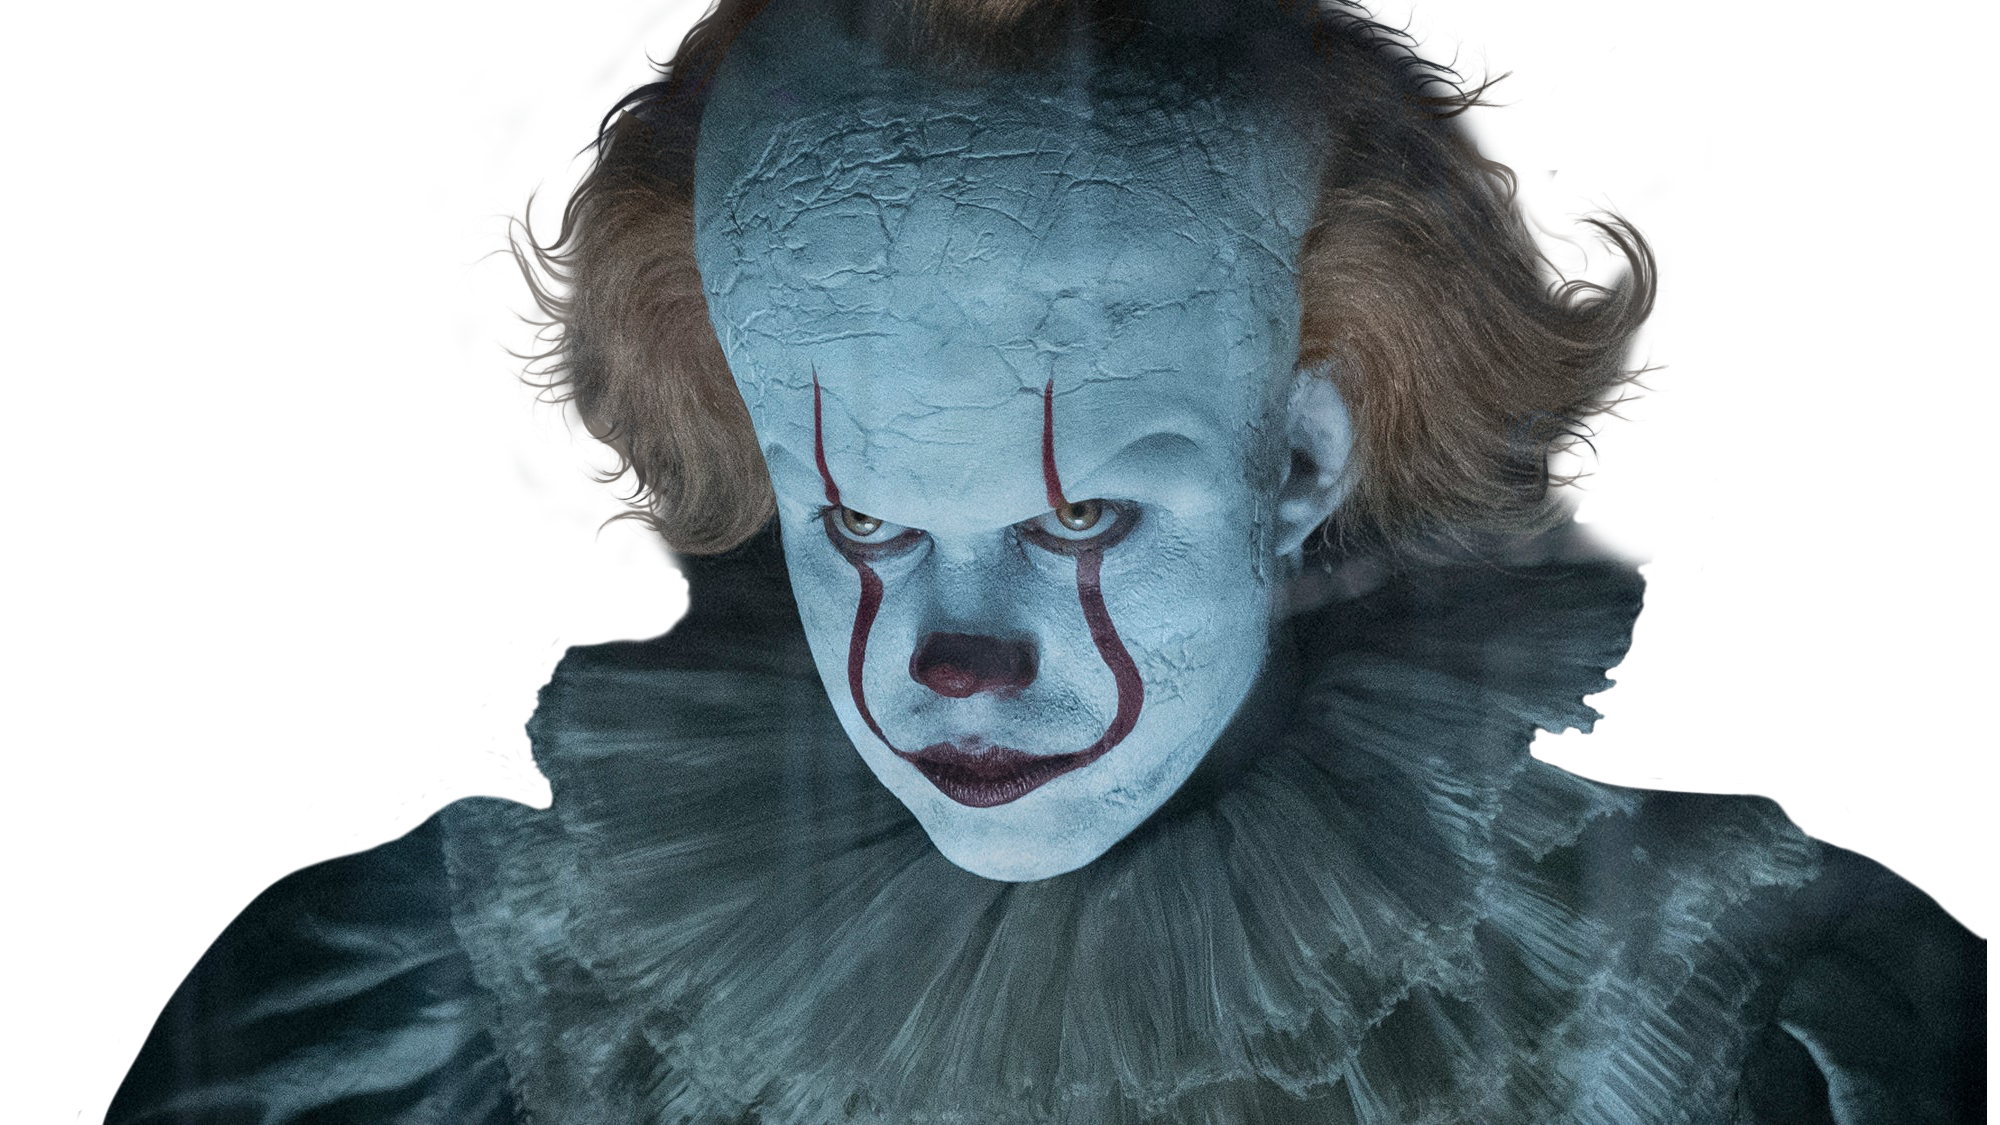 Pennywise stares menacingly in one of the laughable film’s more serious moments.